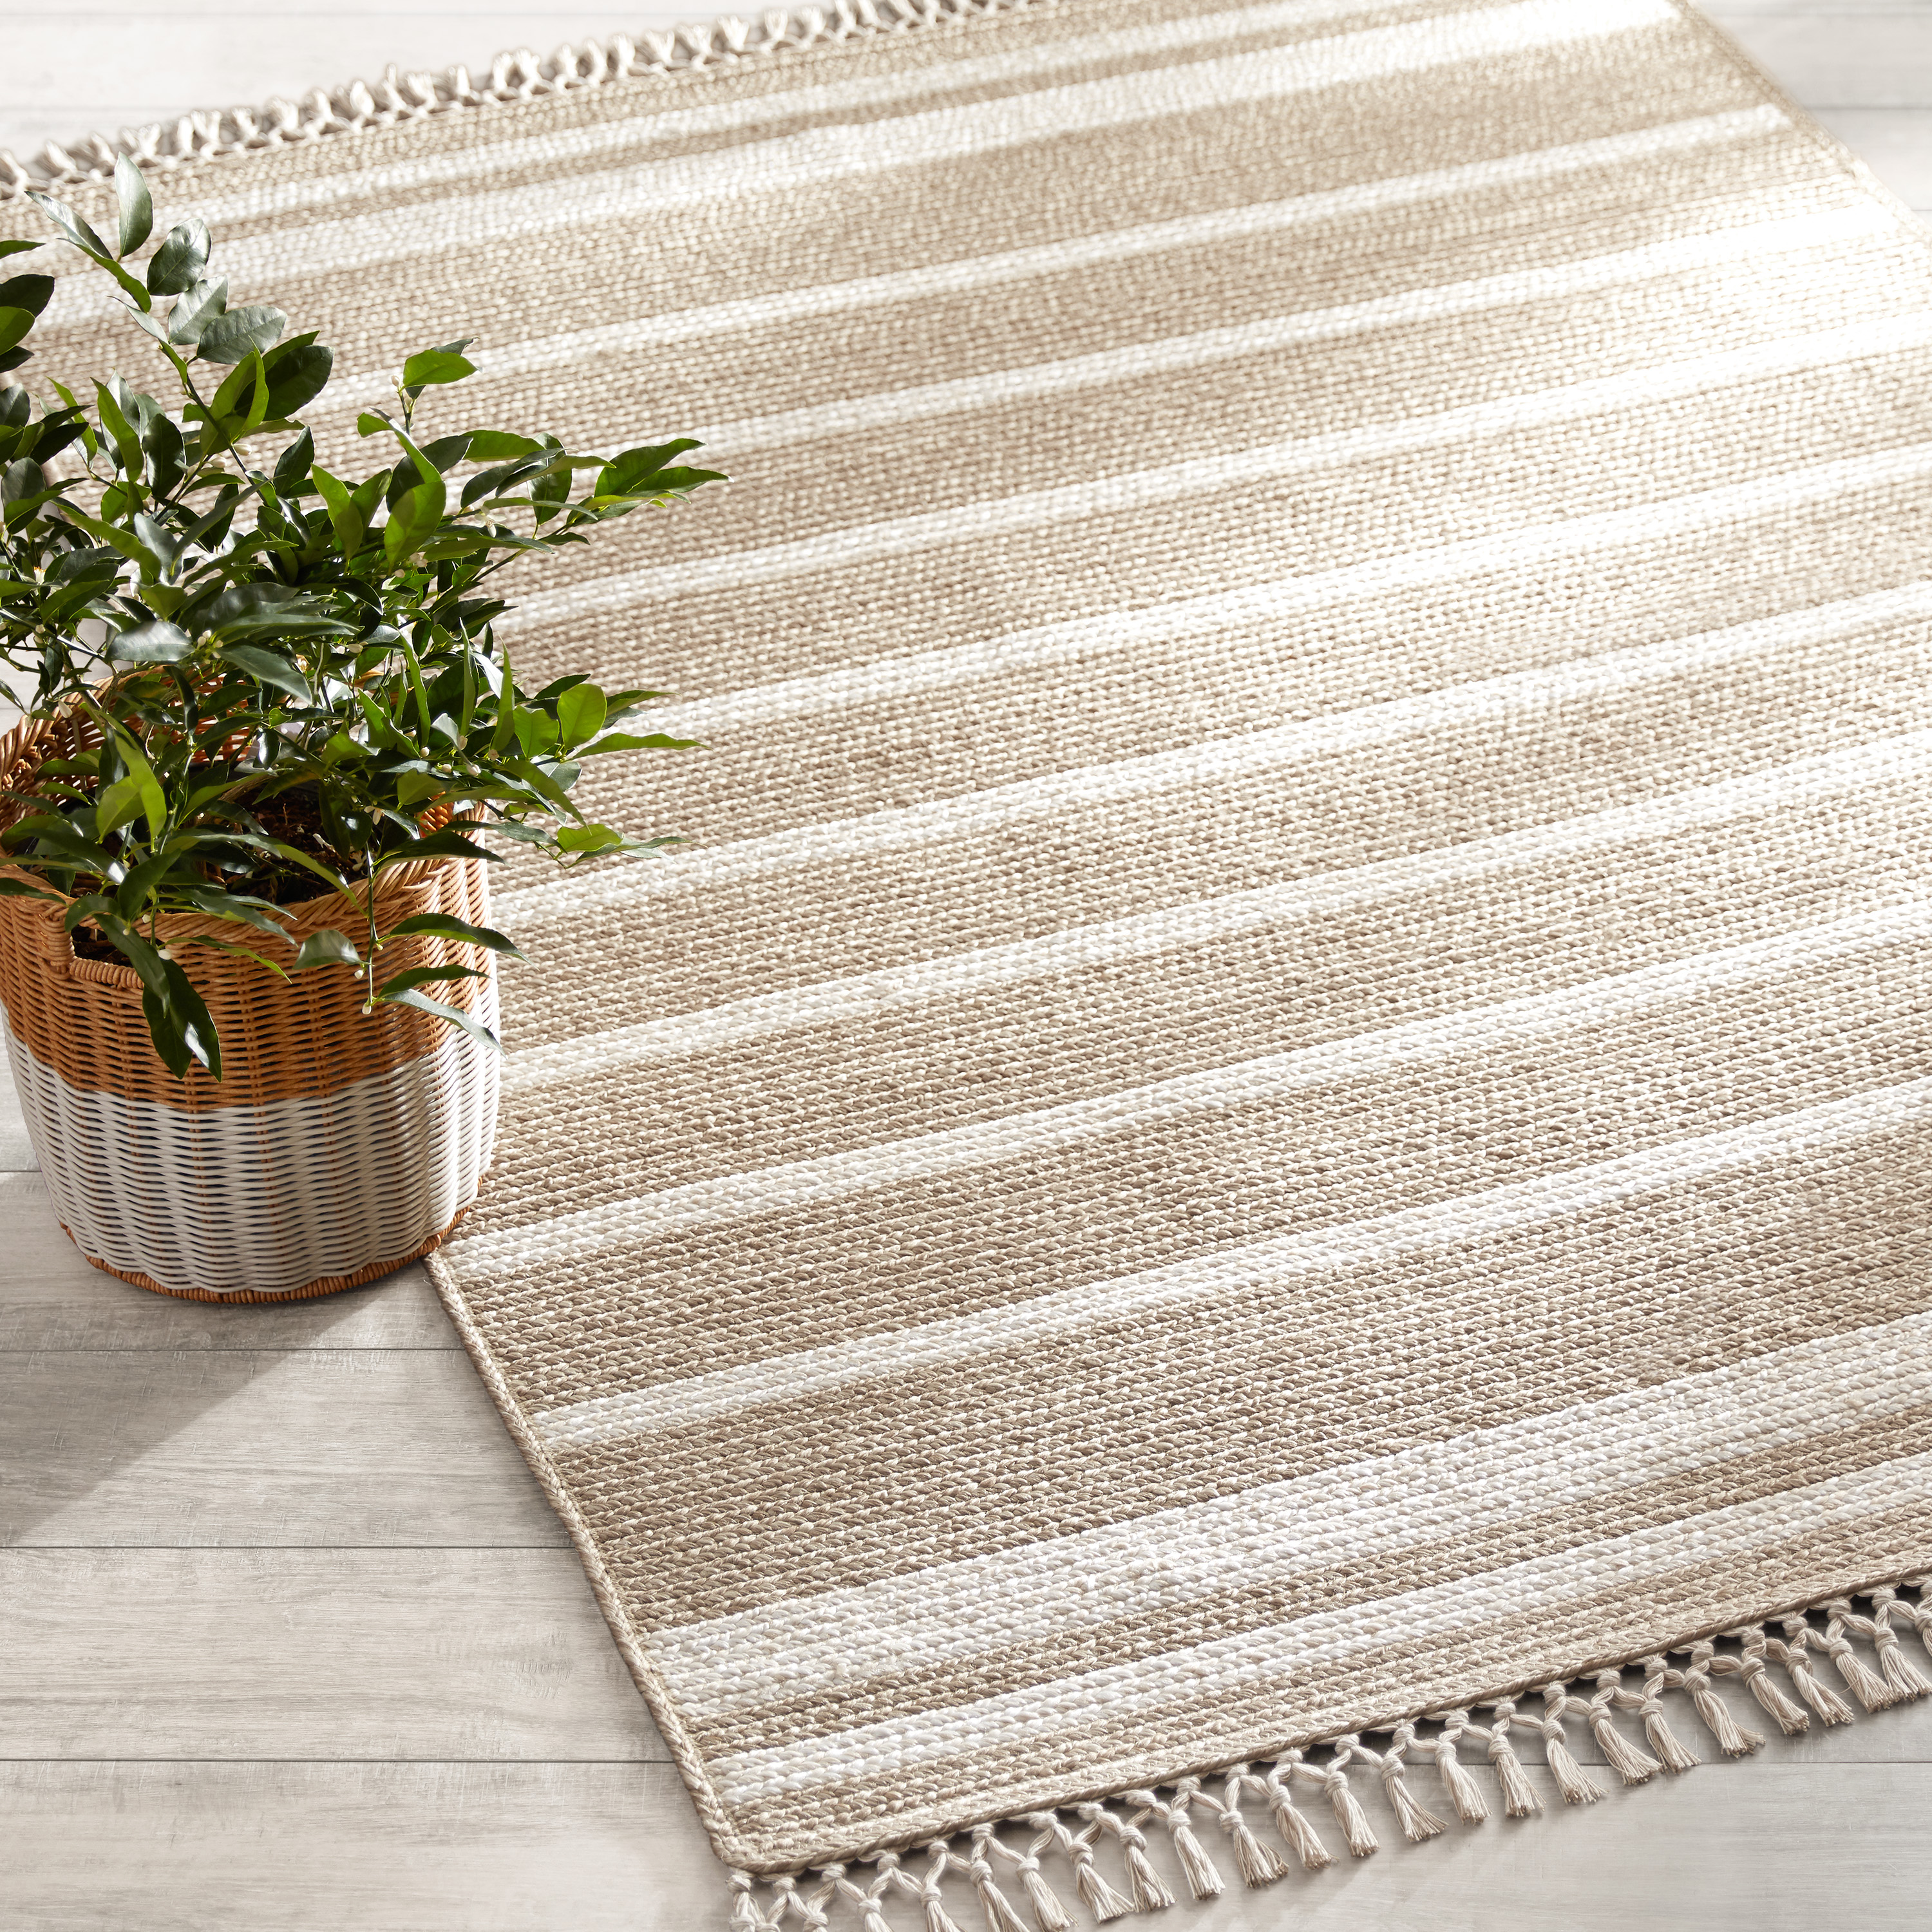 Better Homes & Gardens 5'x7' Striped Natural Outdoor Rug by Dave & Jenny Marrs - image 5 of 10